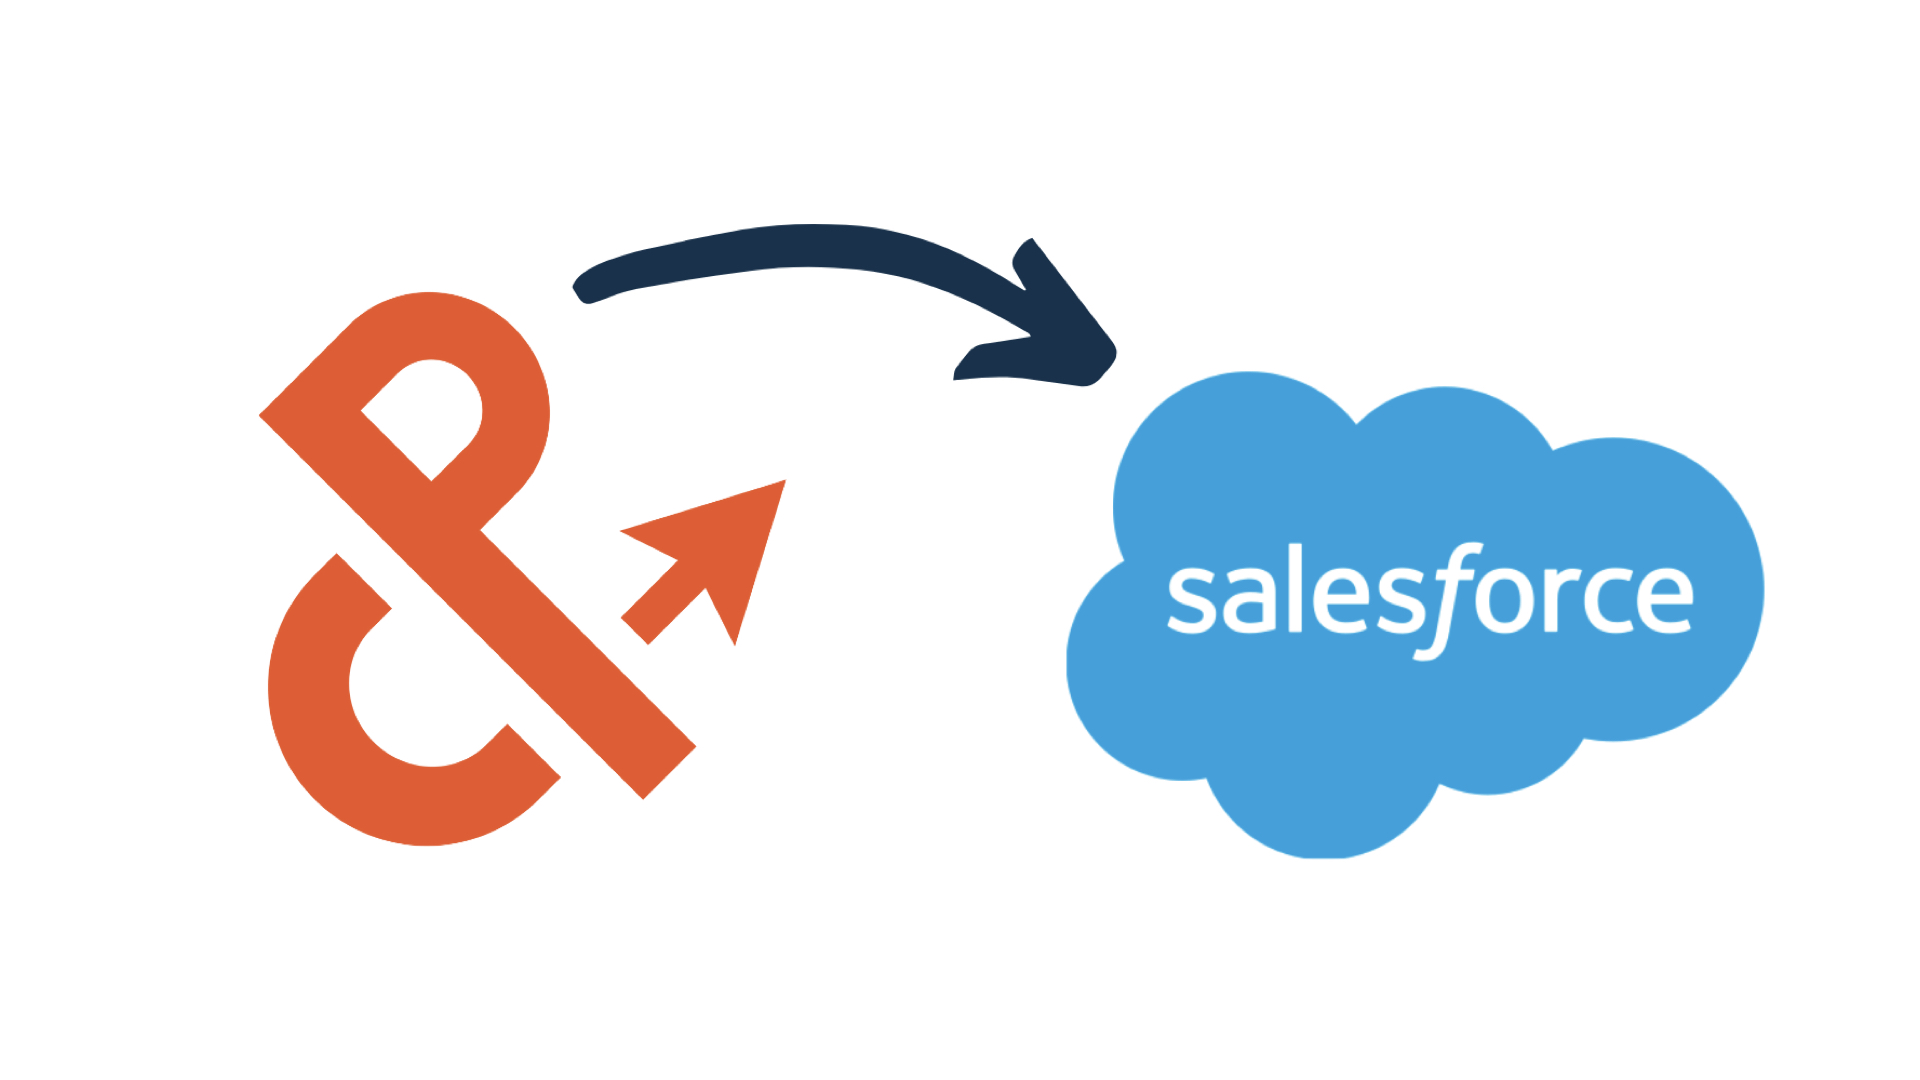 Our Salesforce integration allows you to organize data, use various shopping carts, manage events, sell tickets, and mass communicate through email or texting.